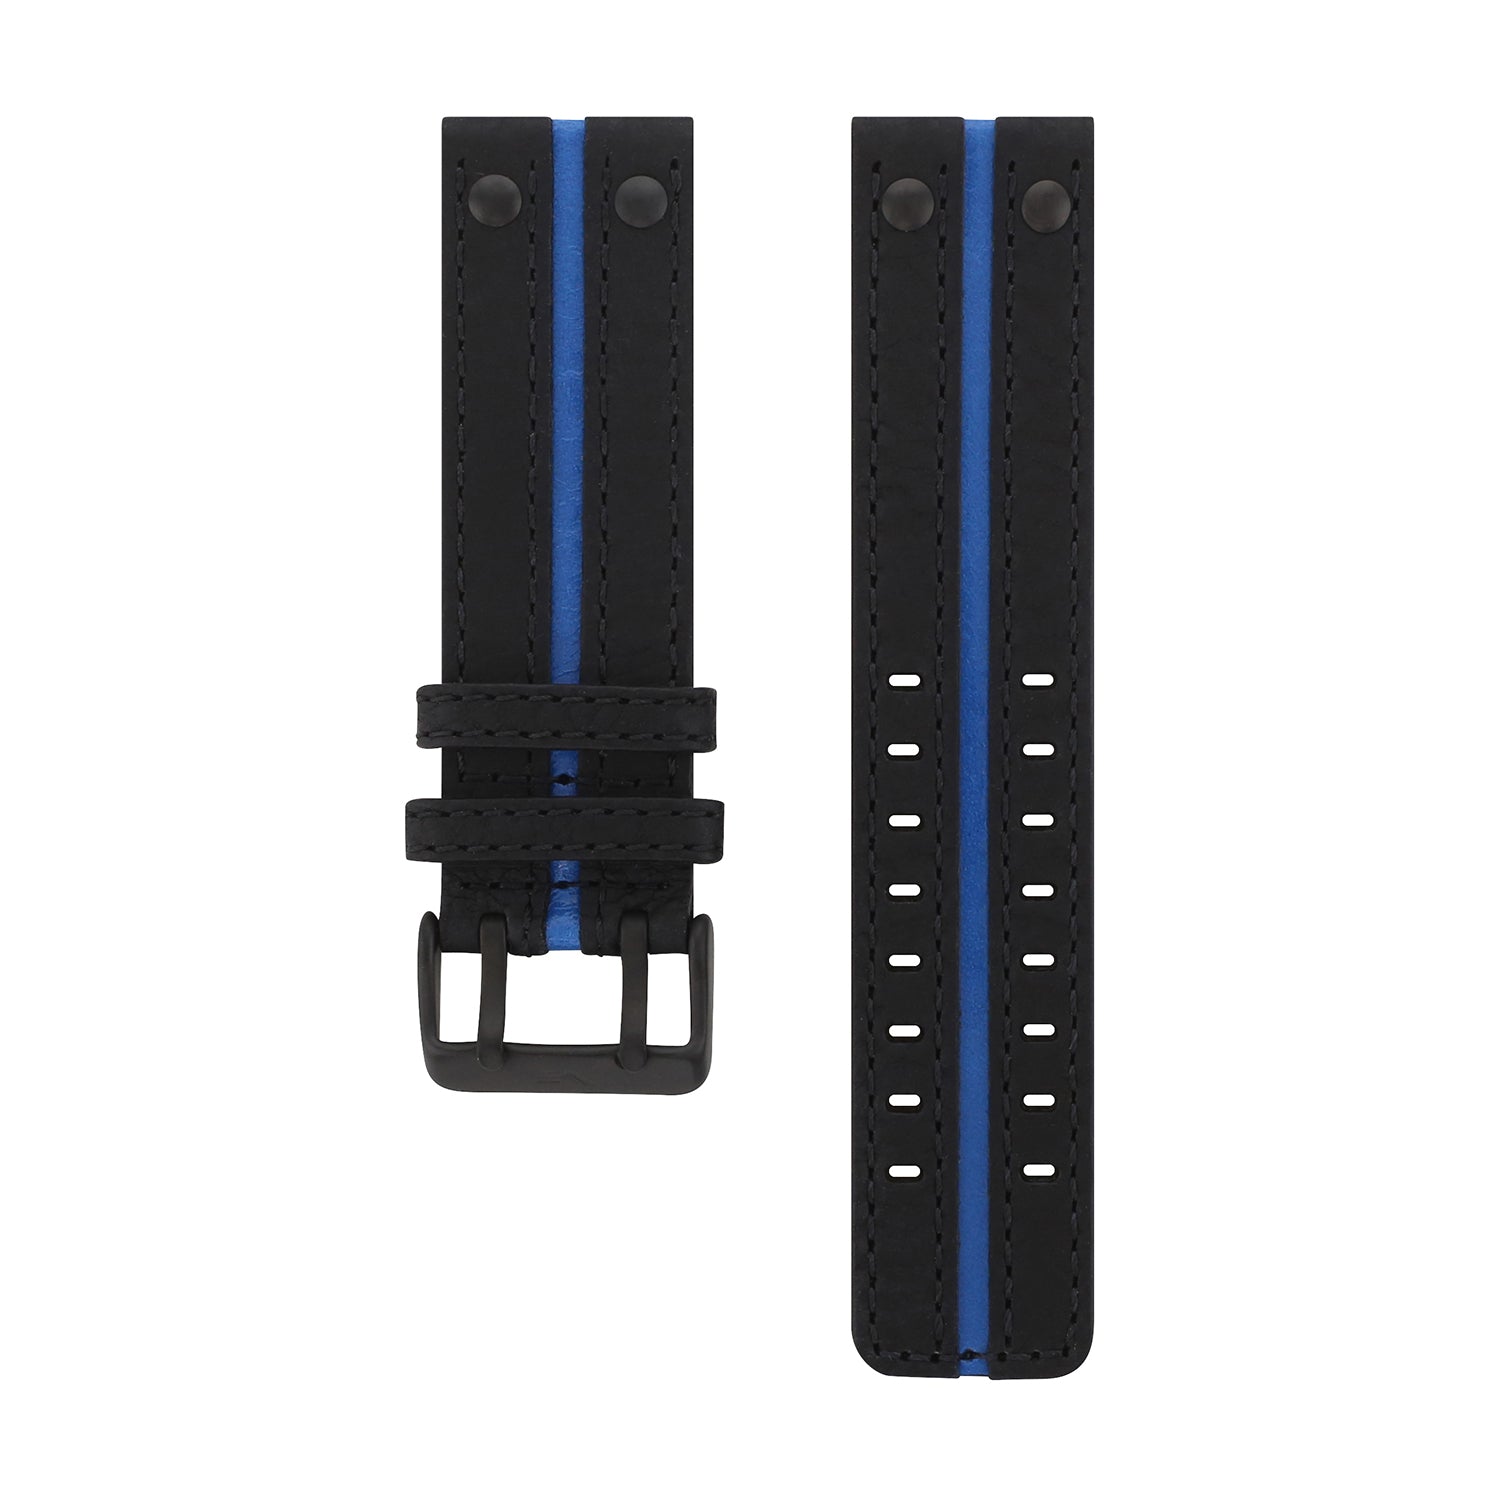 EXPEDITION BLACK & BLUE LEATHER STRAP 24mm - BLACK BUCKLE